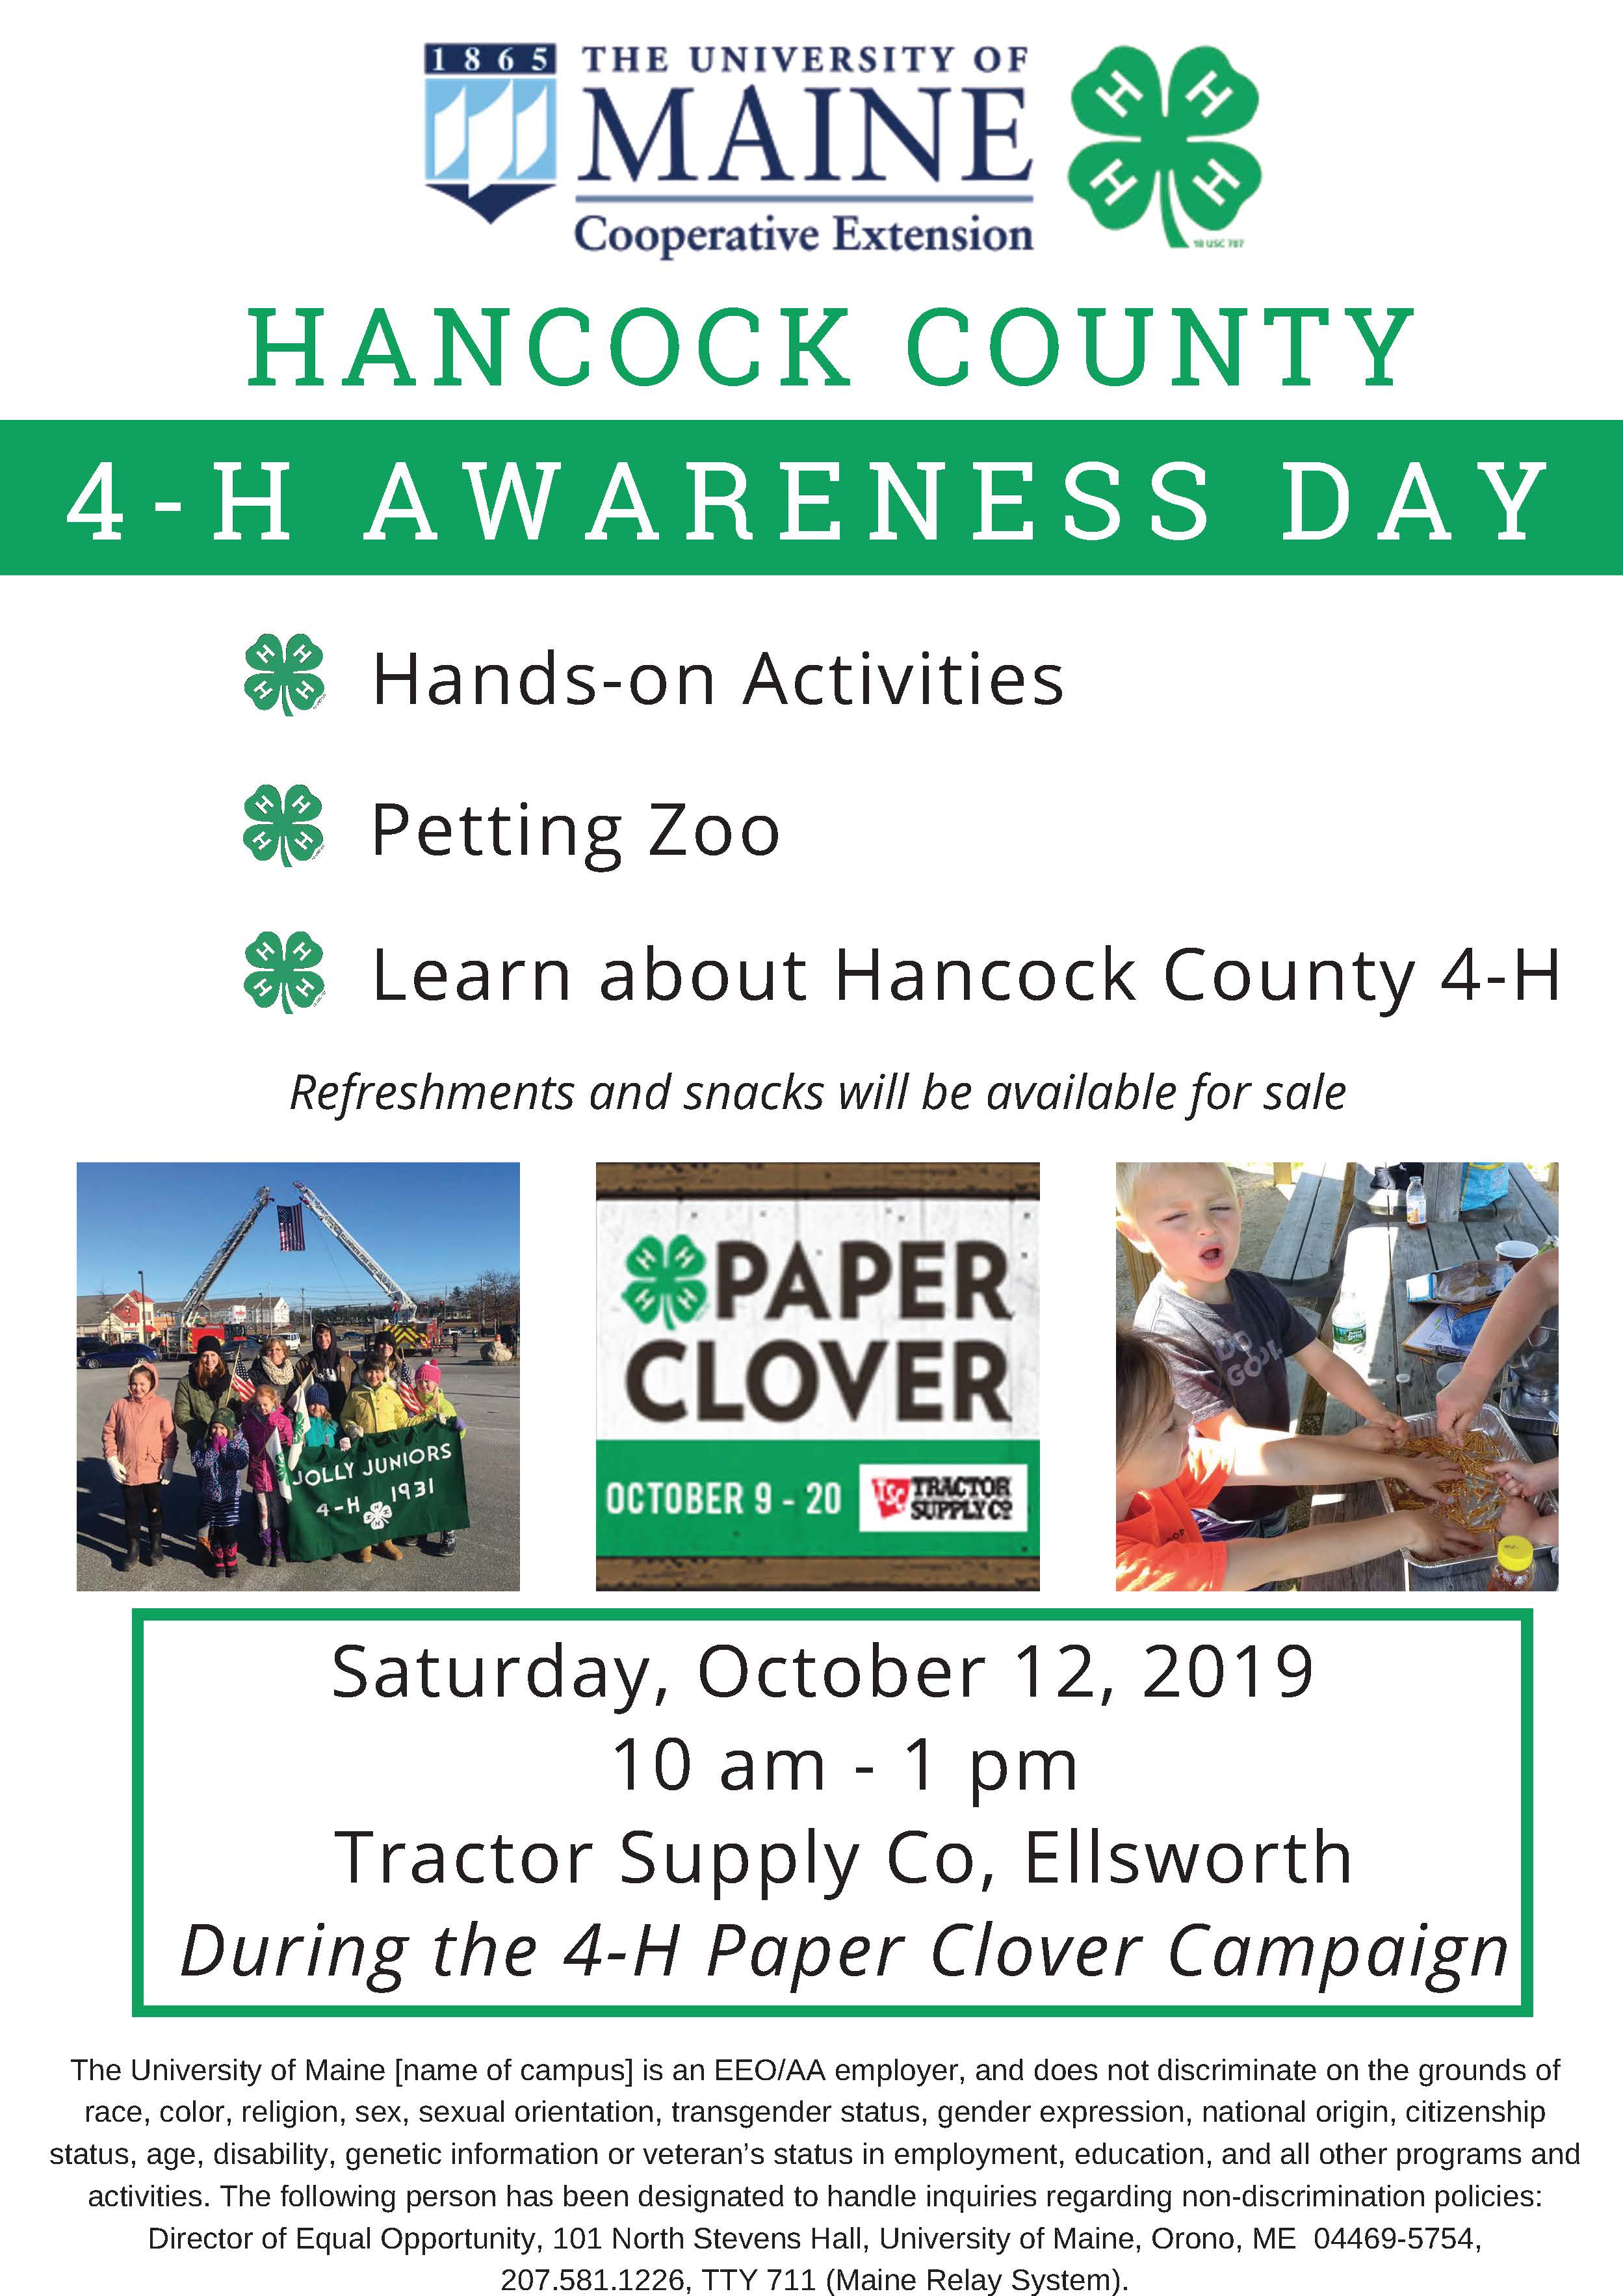 4-H Awareness Day at Tractor Supply Company, October 12